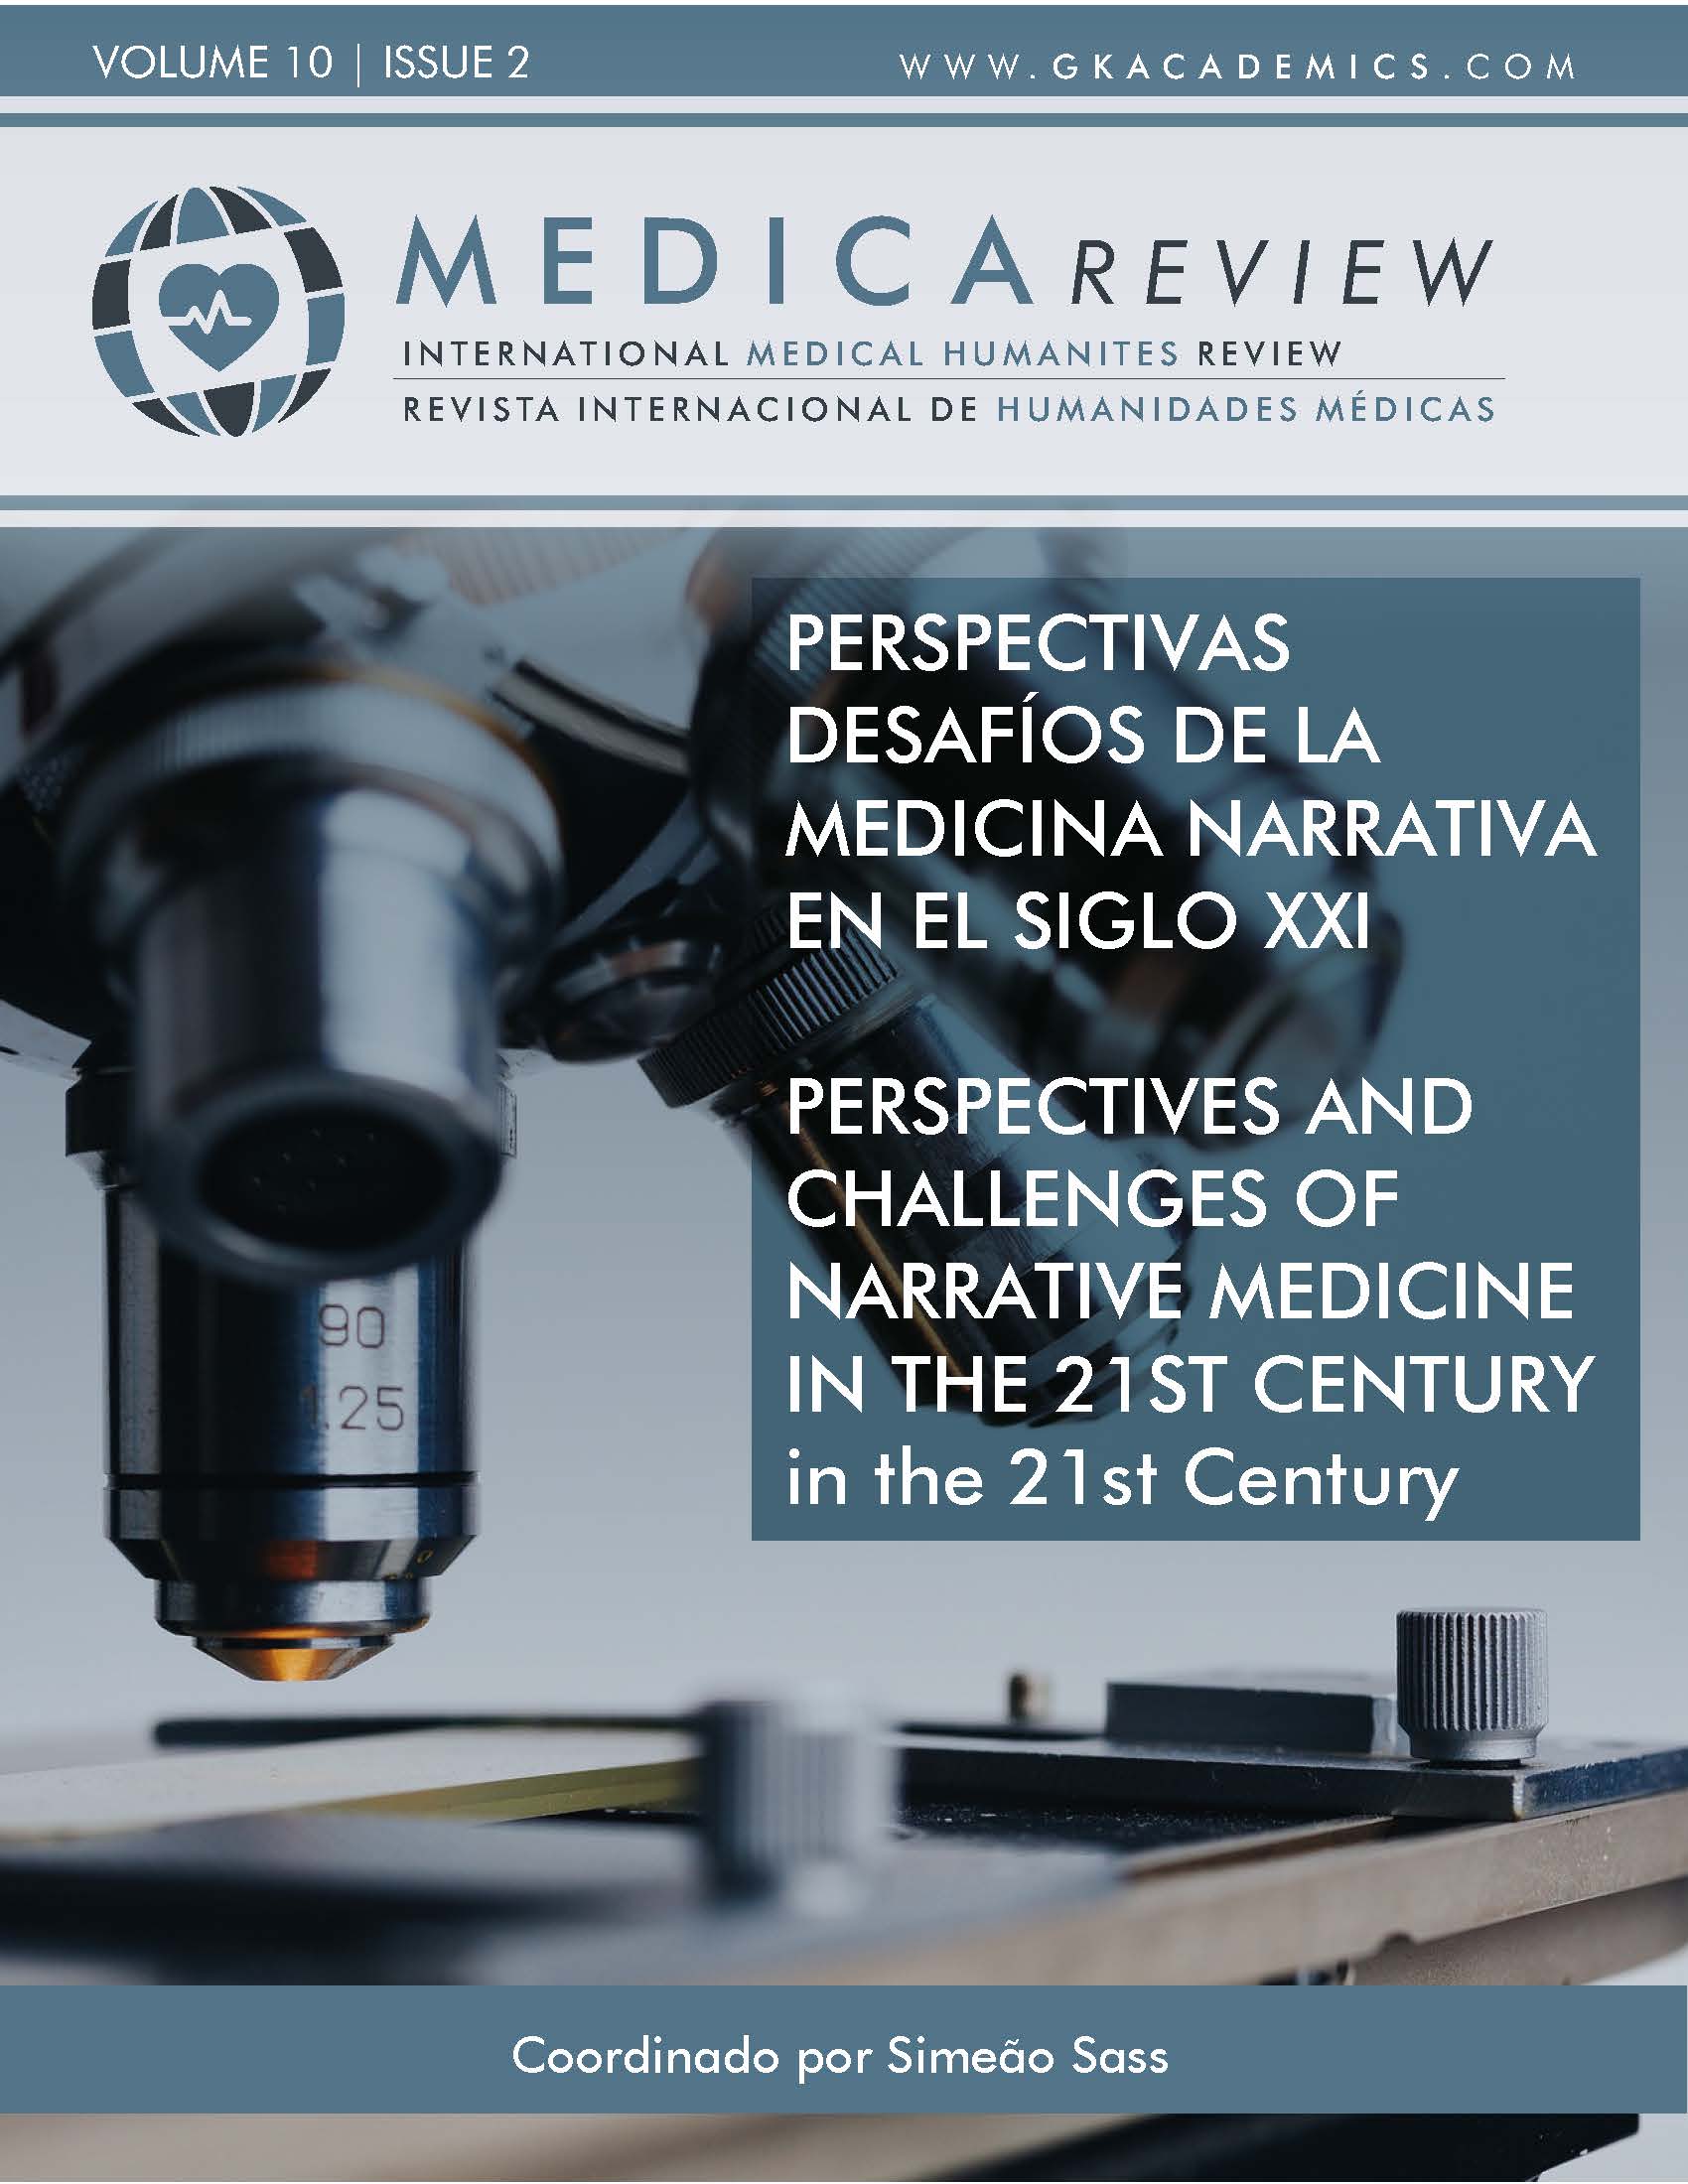 					View Vol. 10 No. 2 (2022): Special Issue "Perspectives and Challenges of Narrative Medicine in the 21st Century"
				